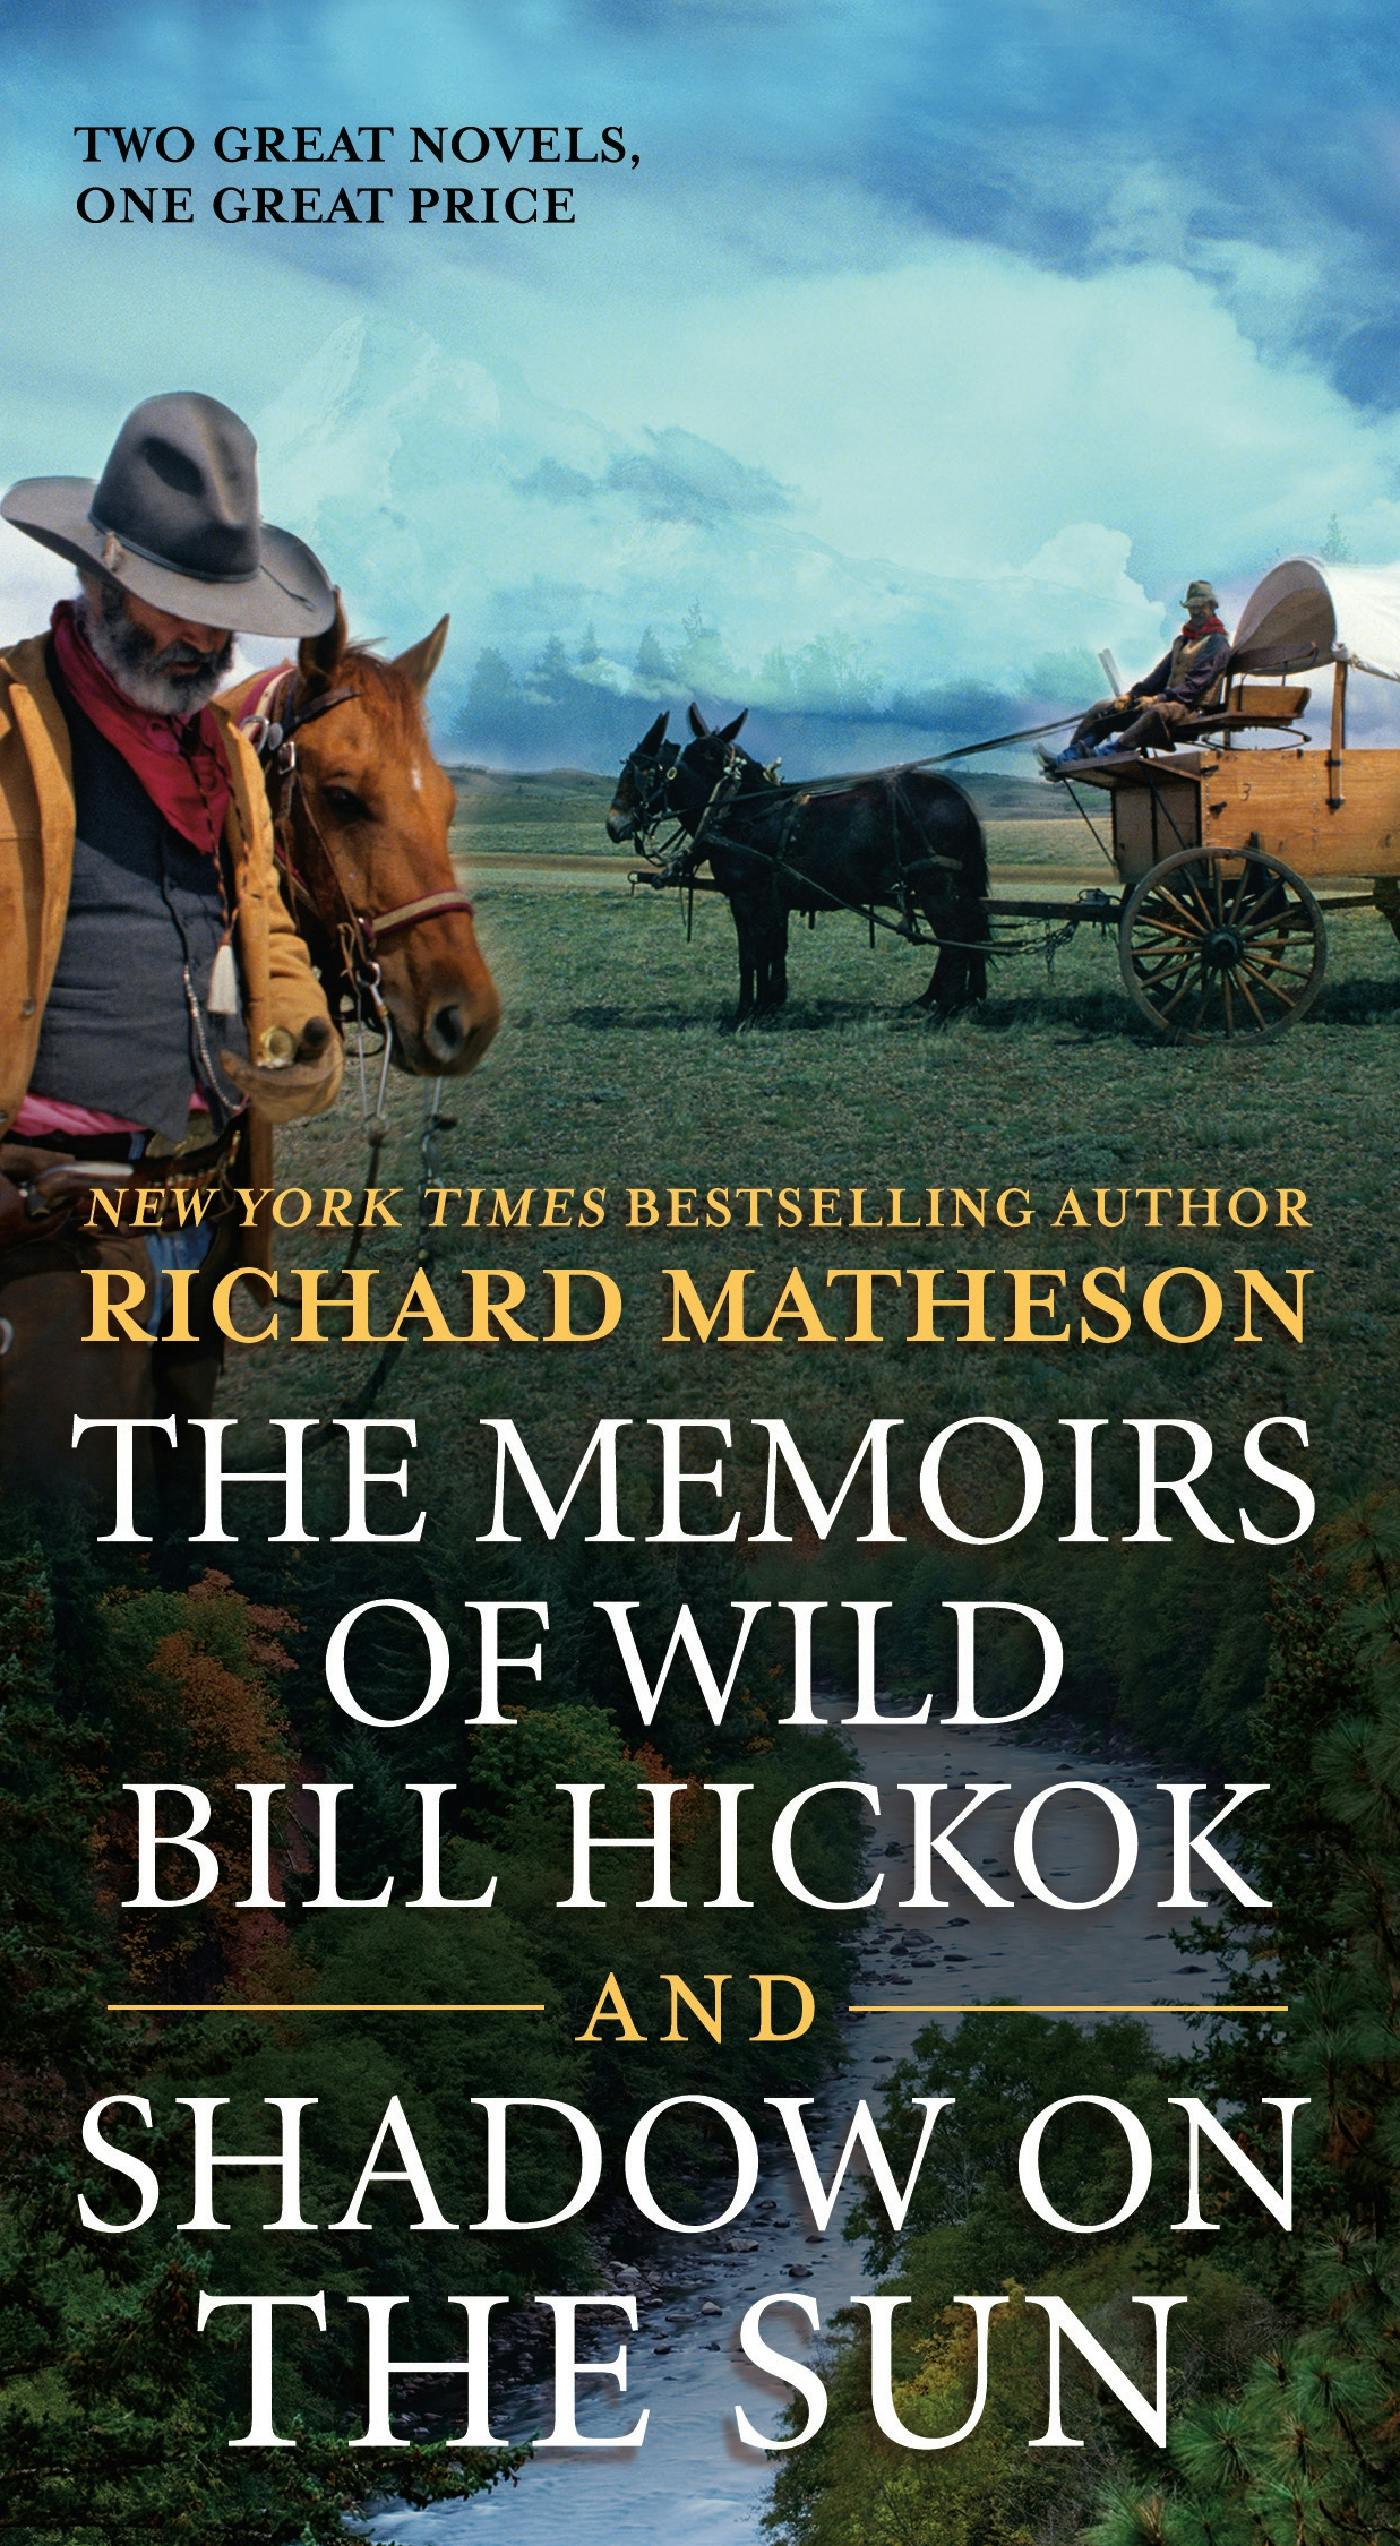 Cover for the book titled as: The Memoirs of Wild Bill Hickok and Shadow on the Sun